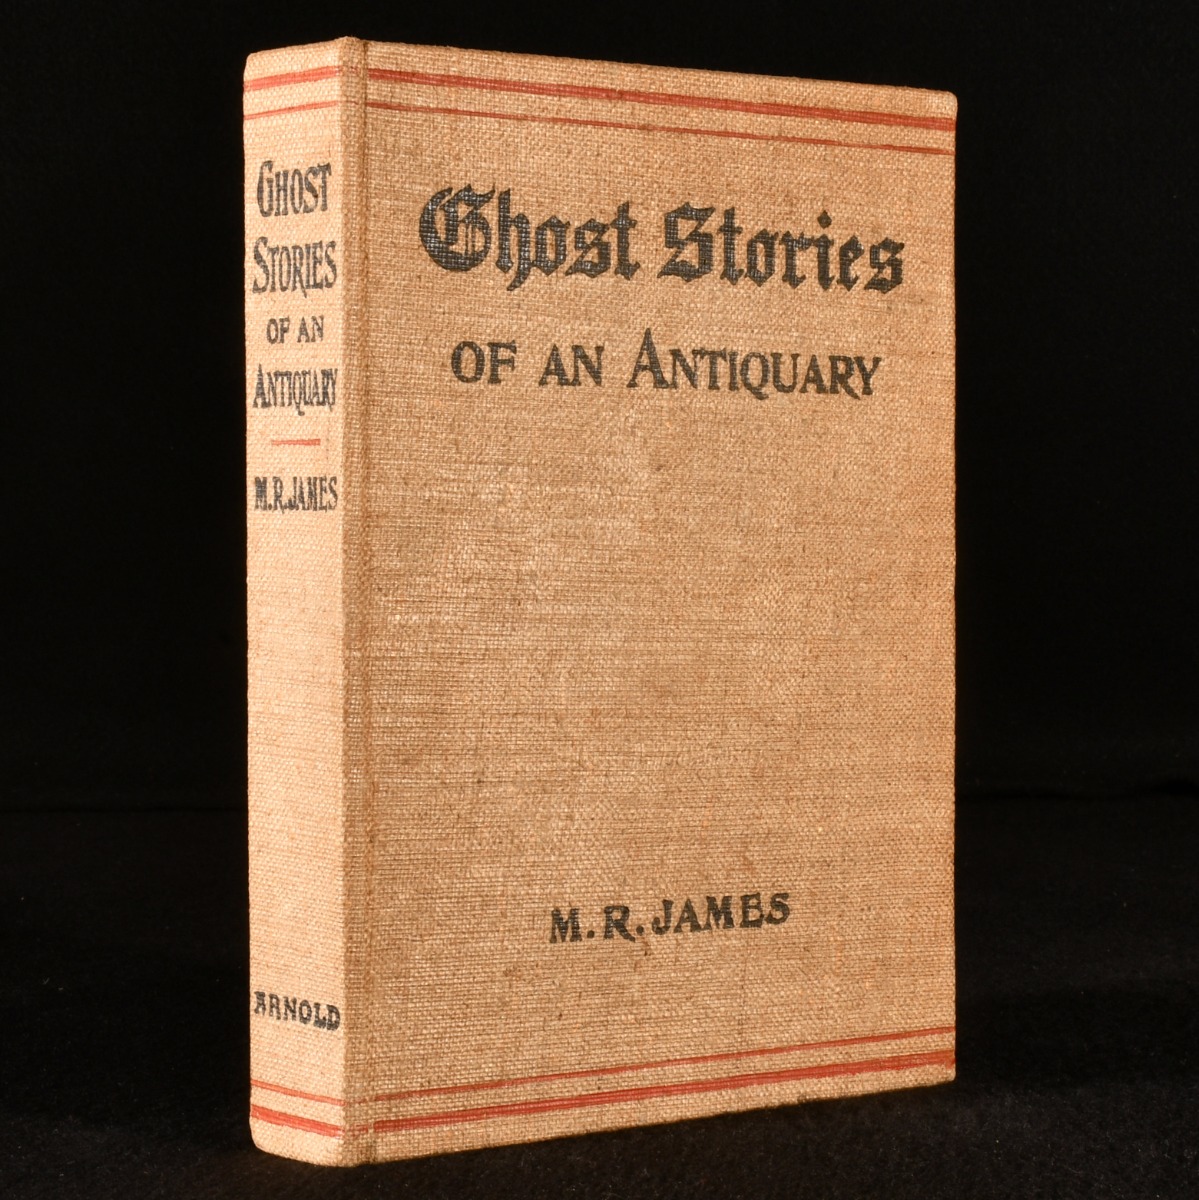 Ghost Stories of an Antiquary - Montague Rhodes James [M. R. James]